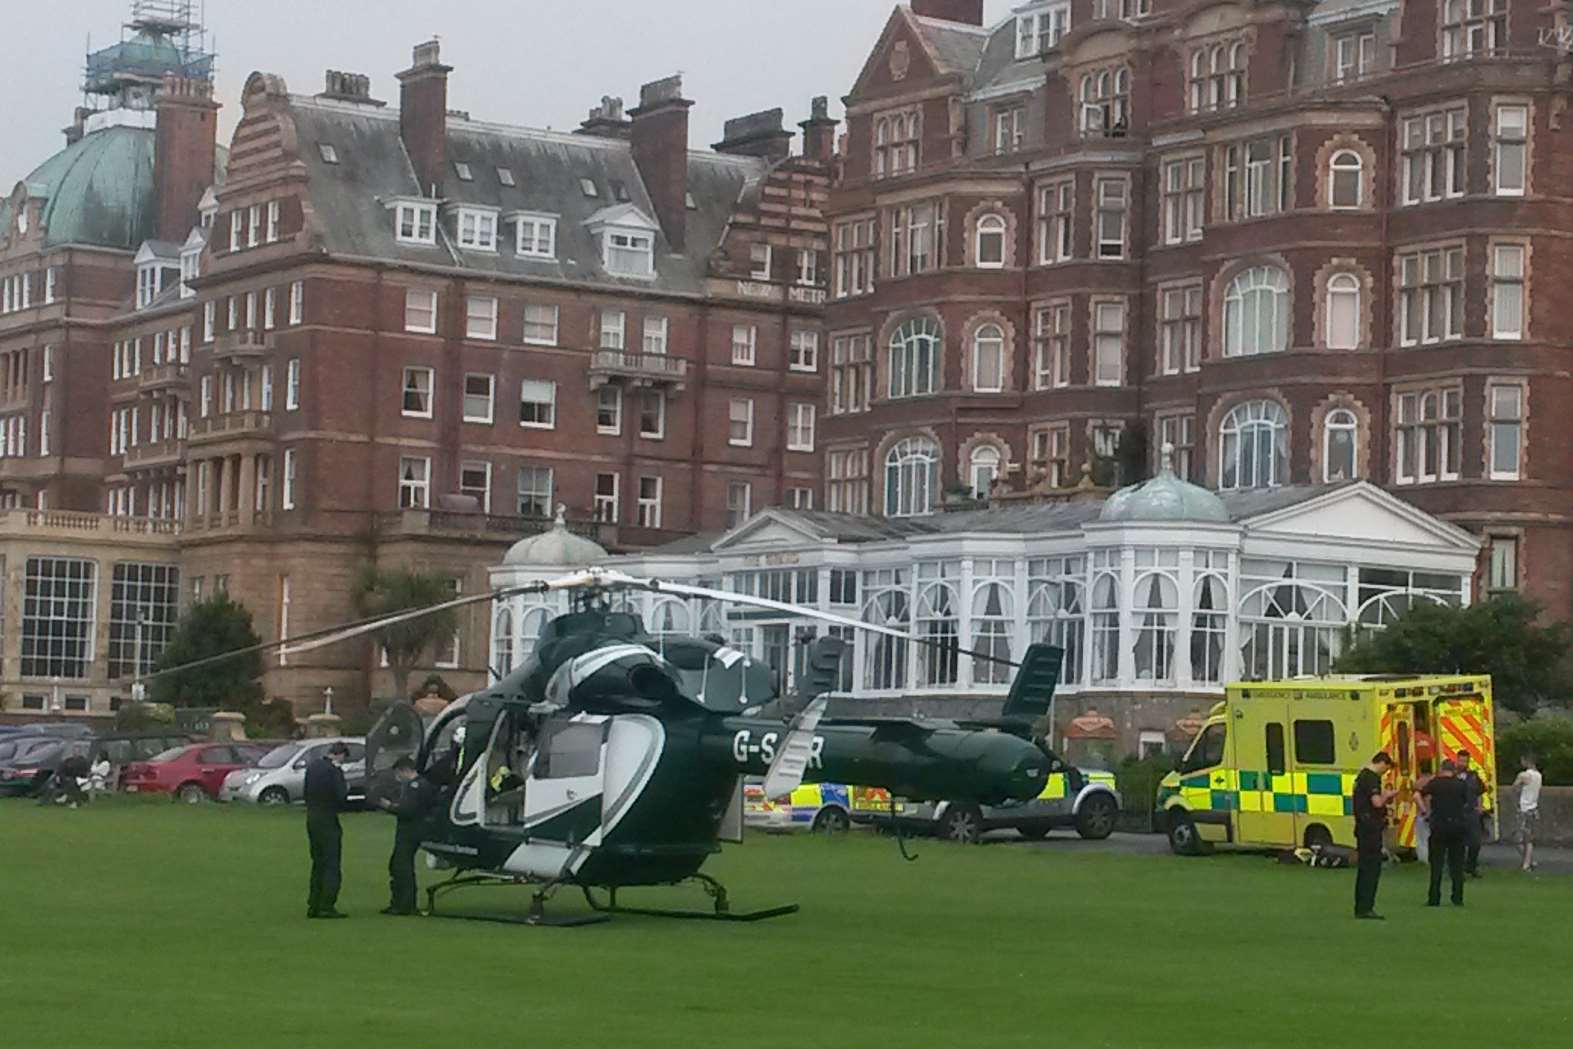 The air ambulance landed at The Leas